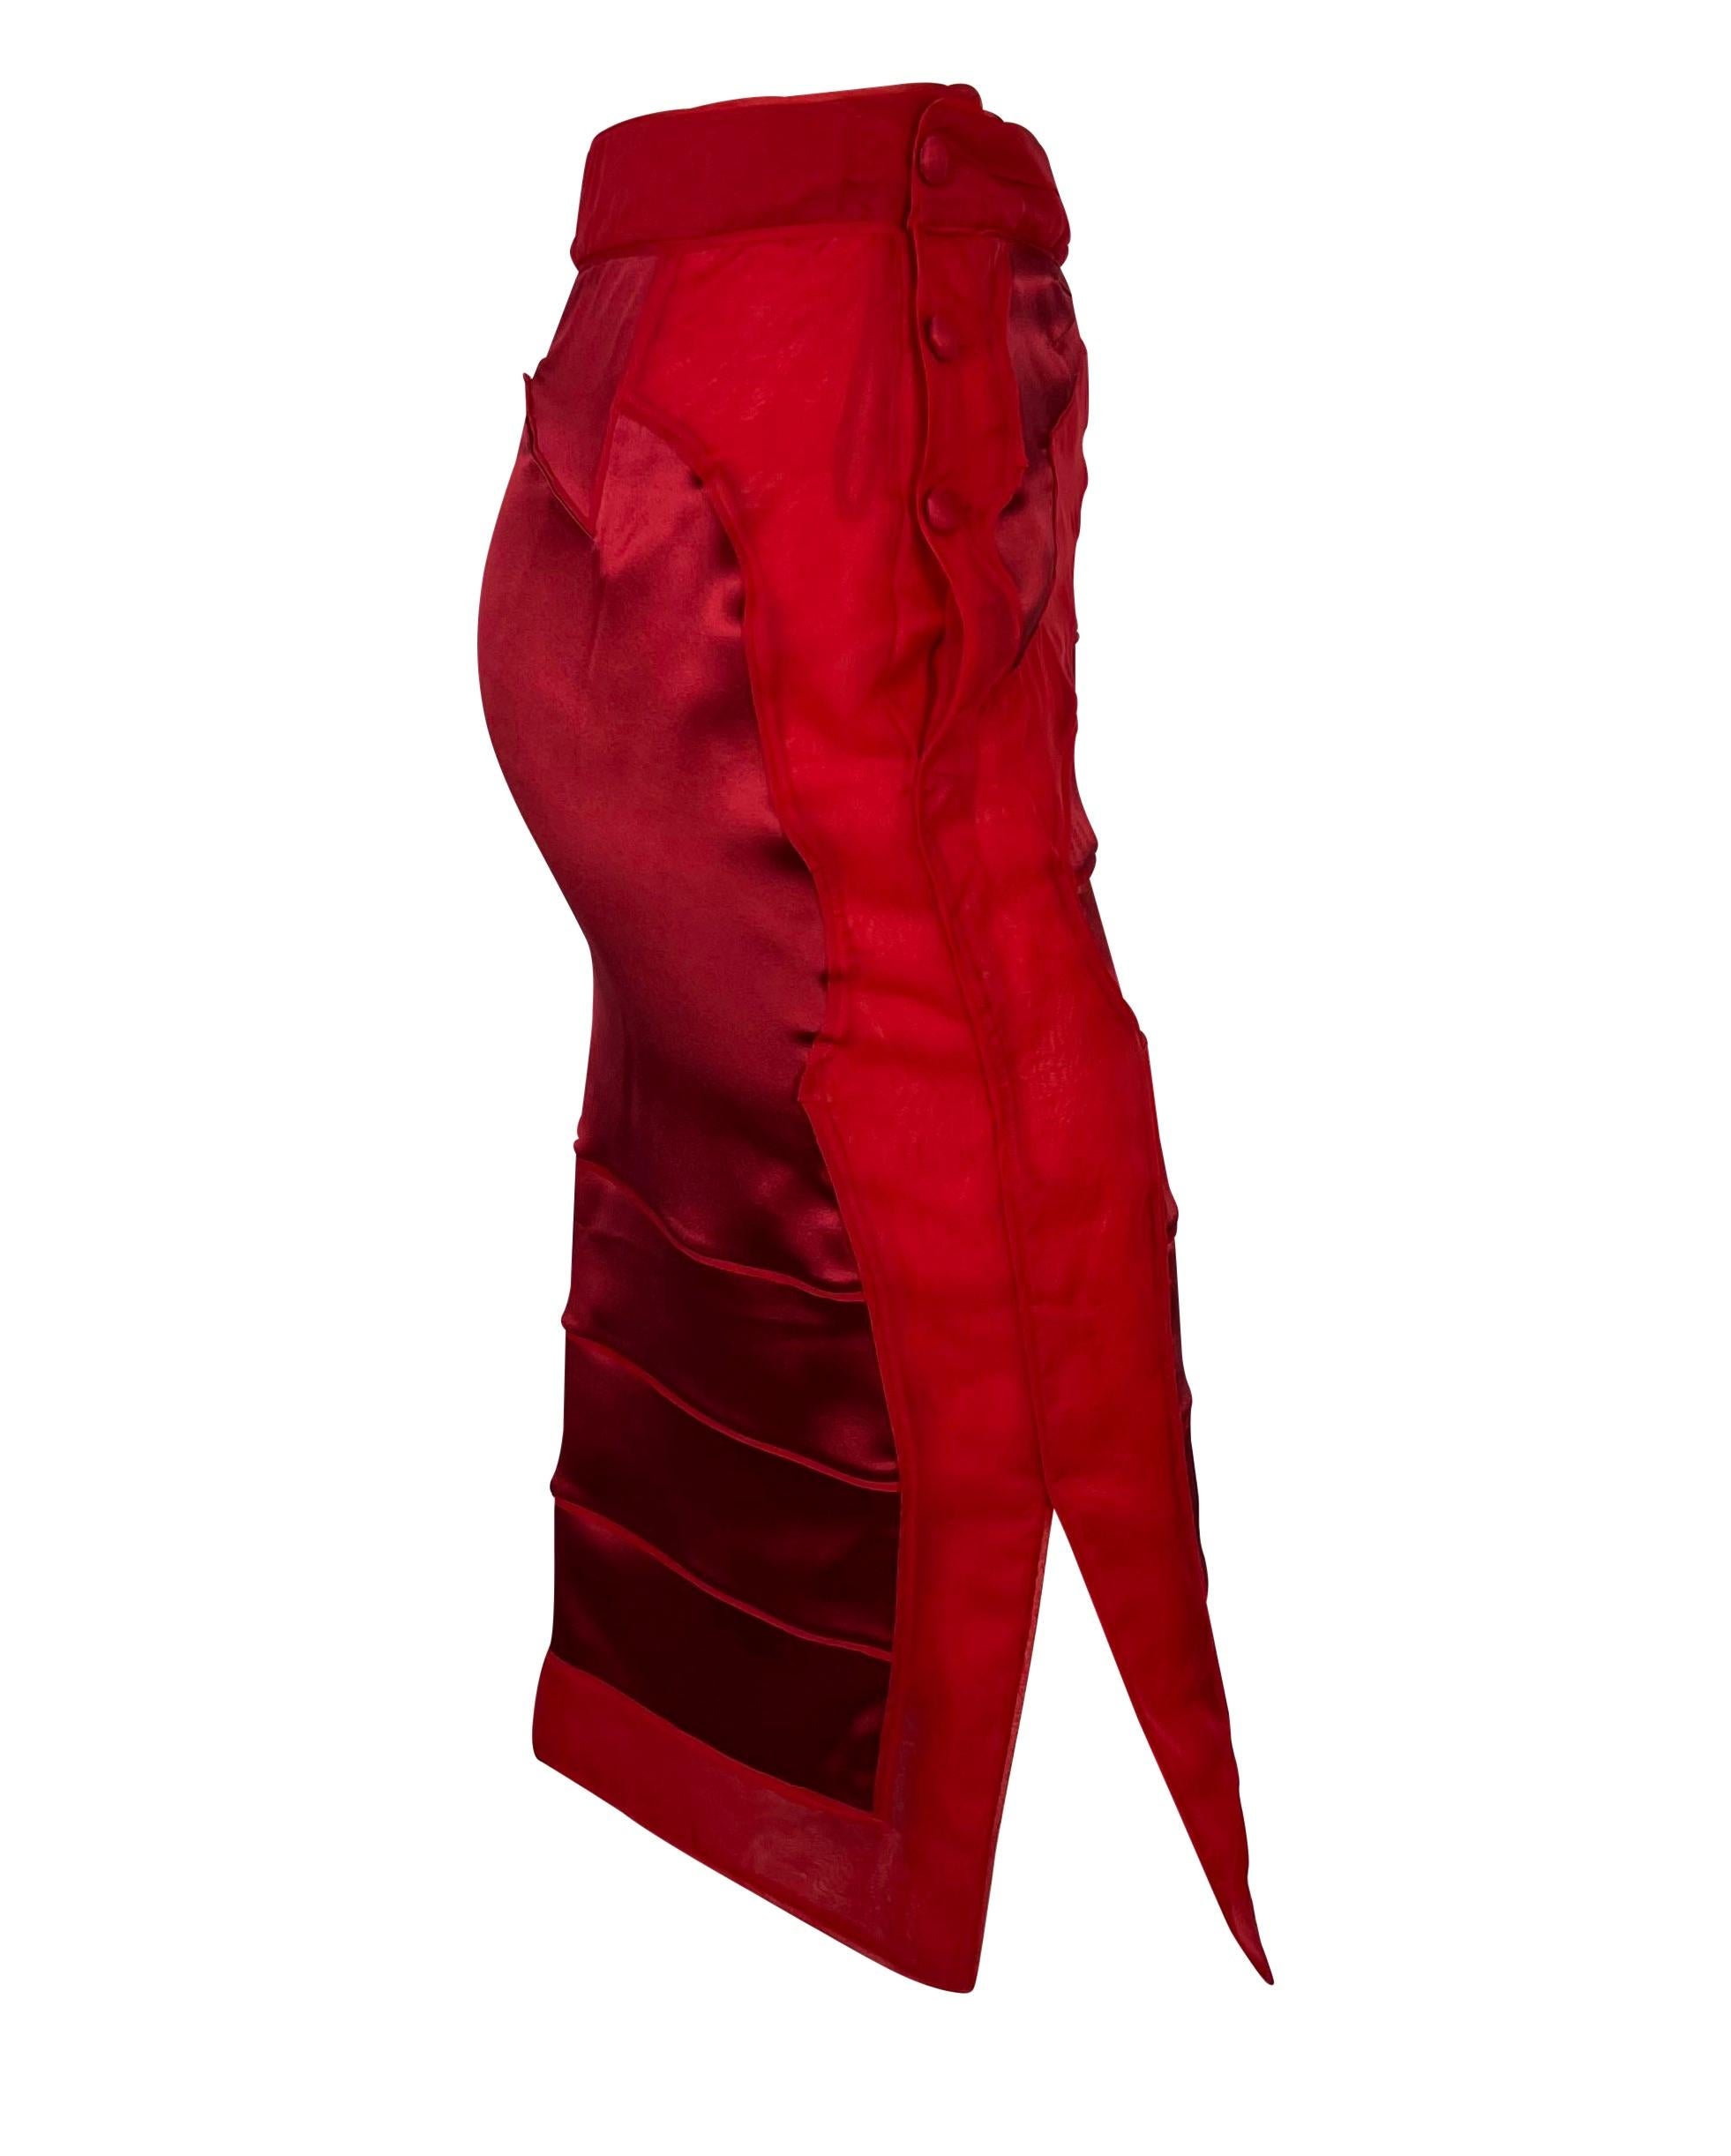 F/W 2004 Yves Saint Laurent by Tom Ford Red Scale Chinoiserie Silk Skirt For Sale 3